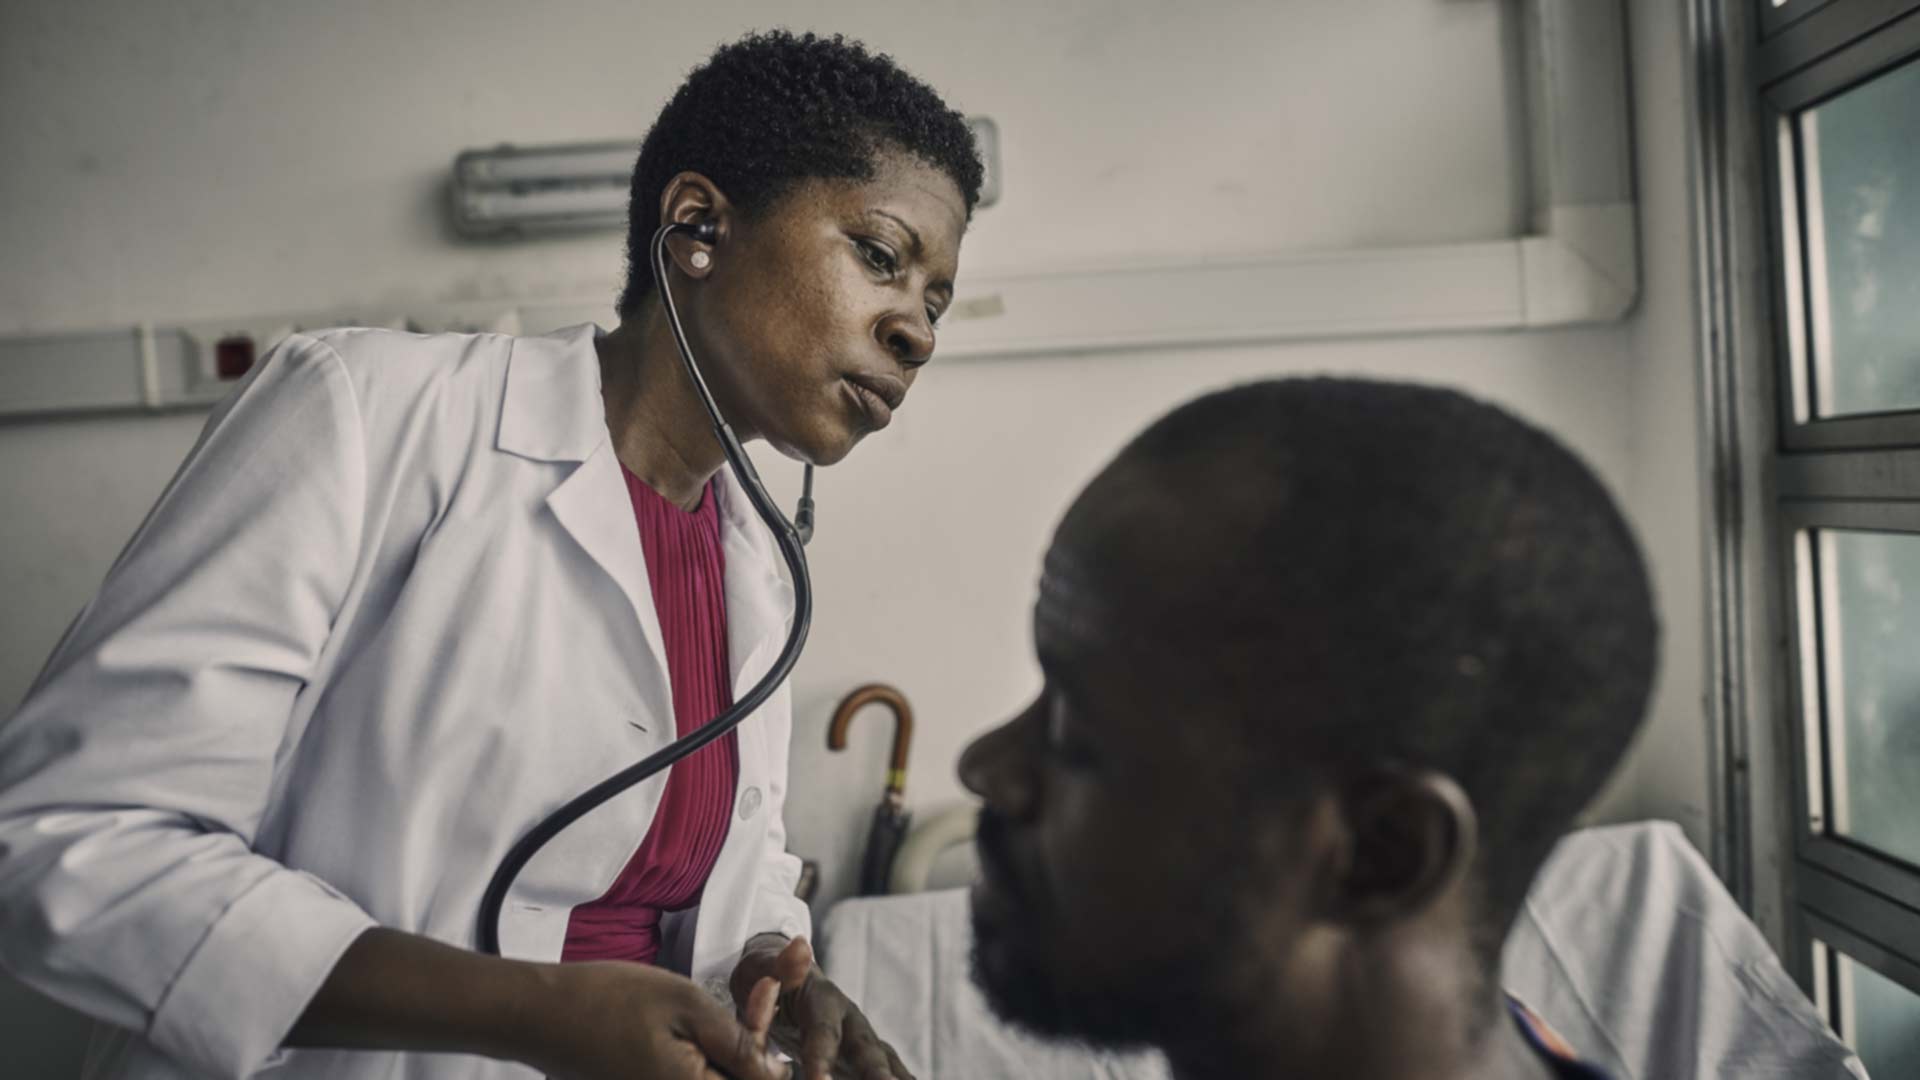 us navy sailor and infectious disease phsician doctor nehkonti adams treats a patient at a clinic in monrovia, liberia 